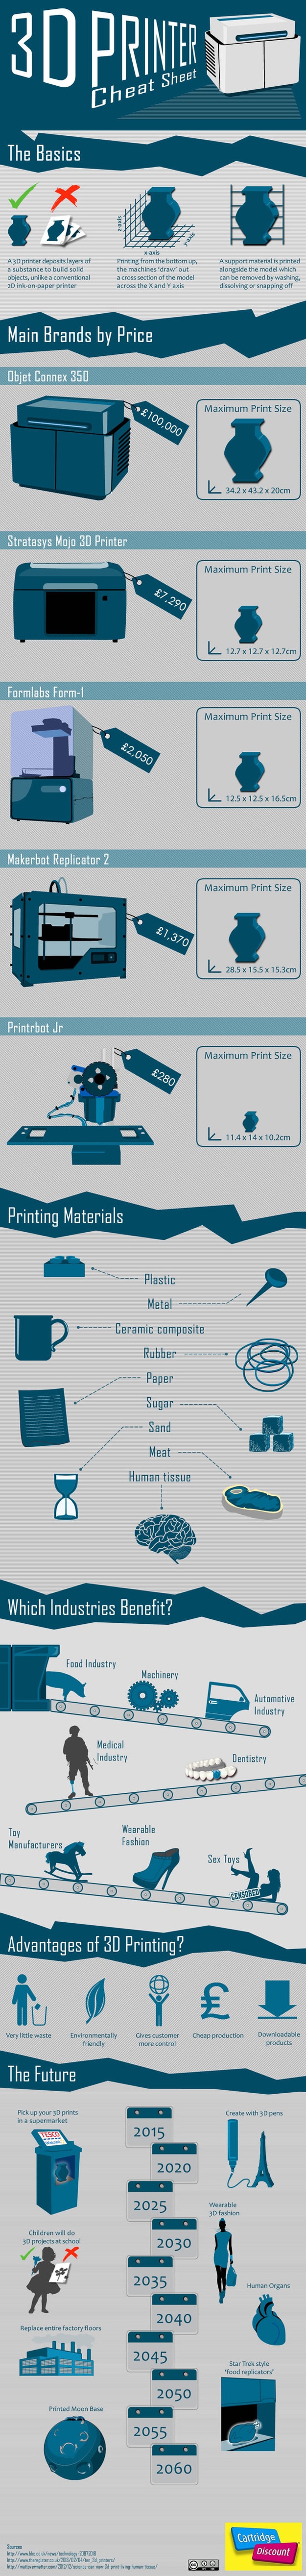 3d-printing-potential-applications-infographic